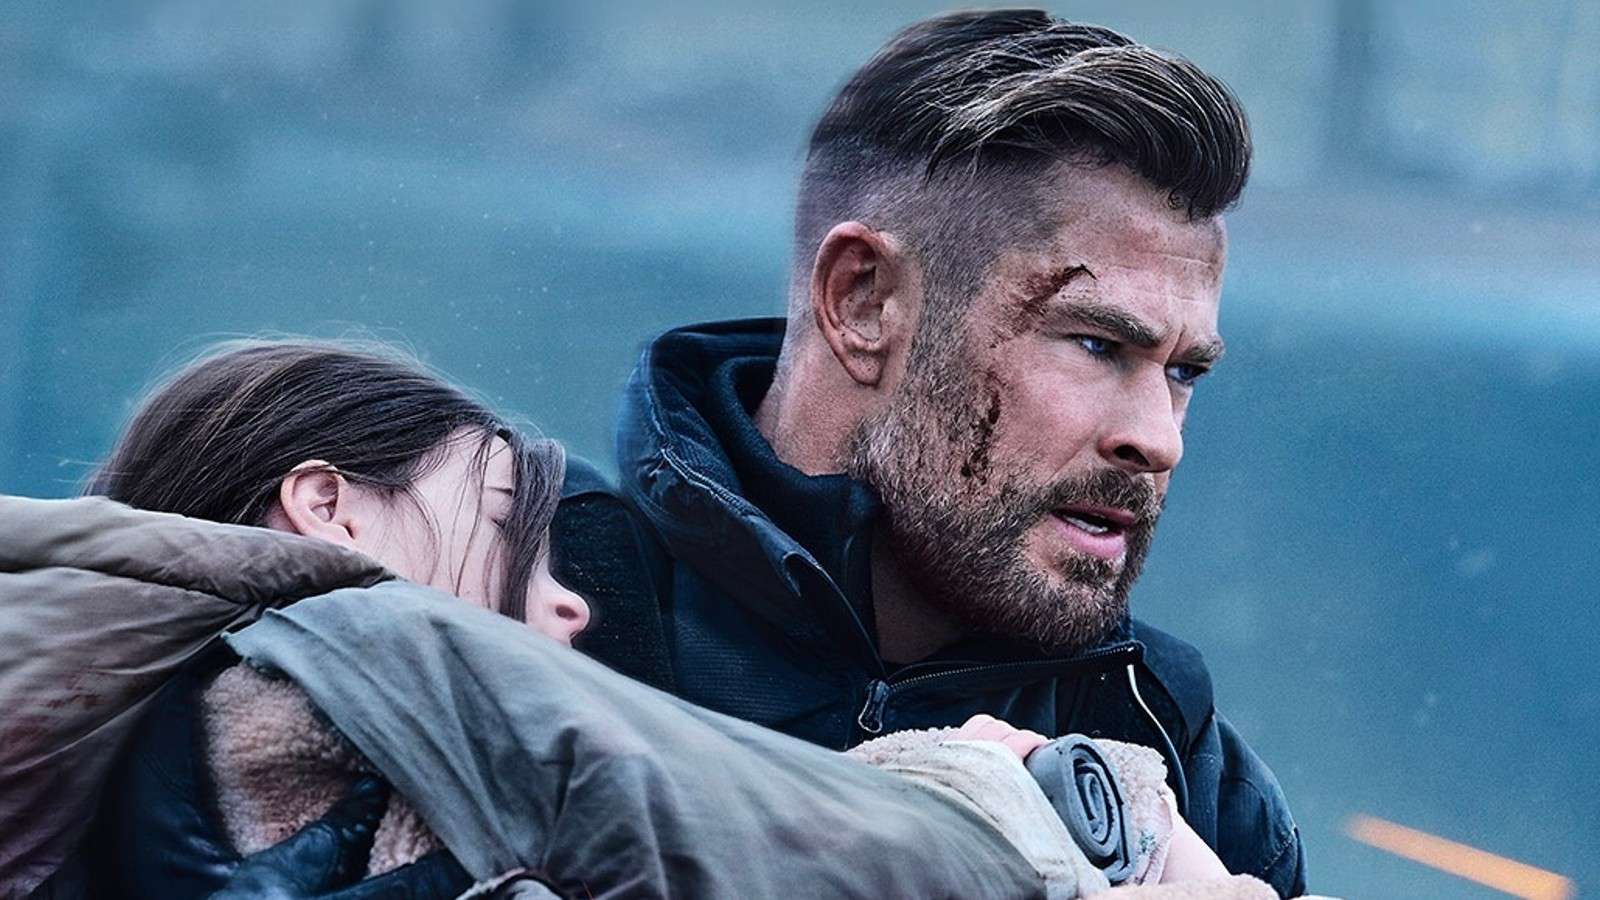 Chris Hemsworth in the new Extraction 2 trailer